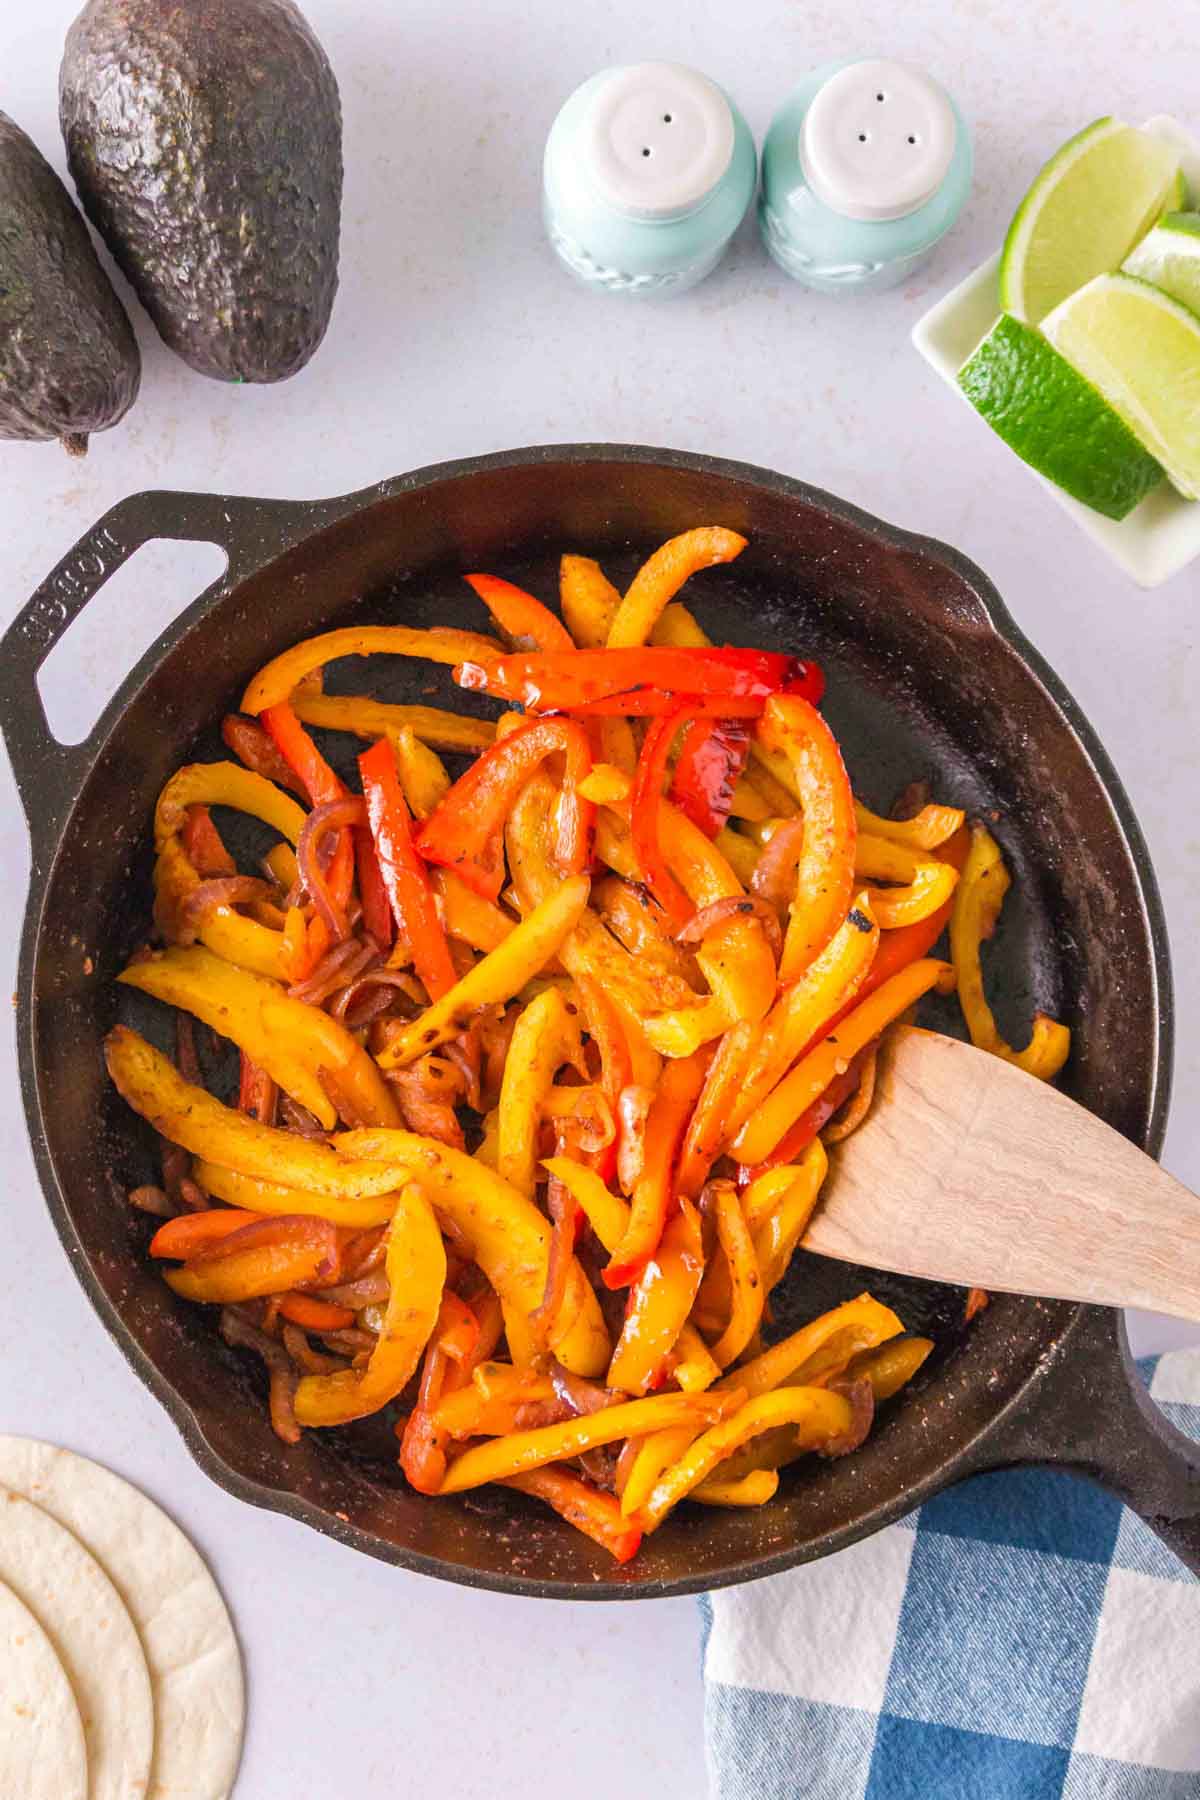 Fajita onions and peppers cooking in a cast iron skillet with a wooden spoon.